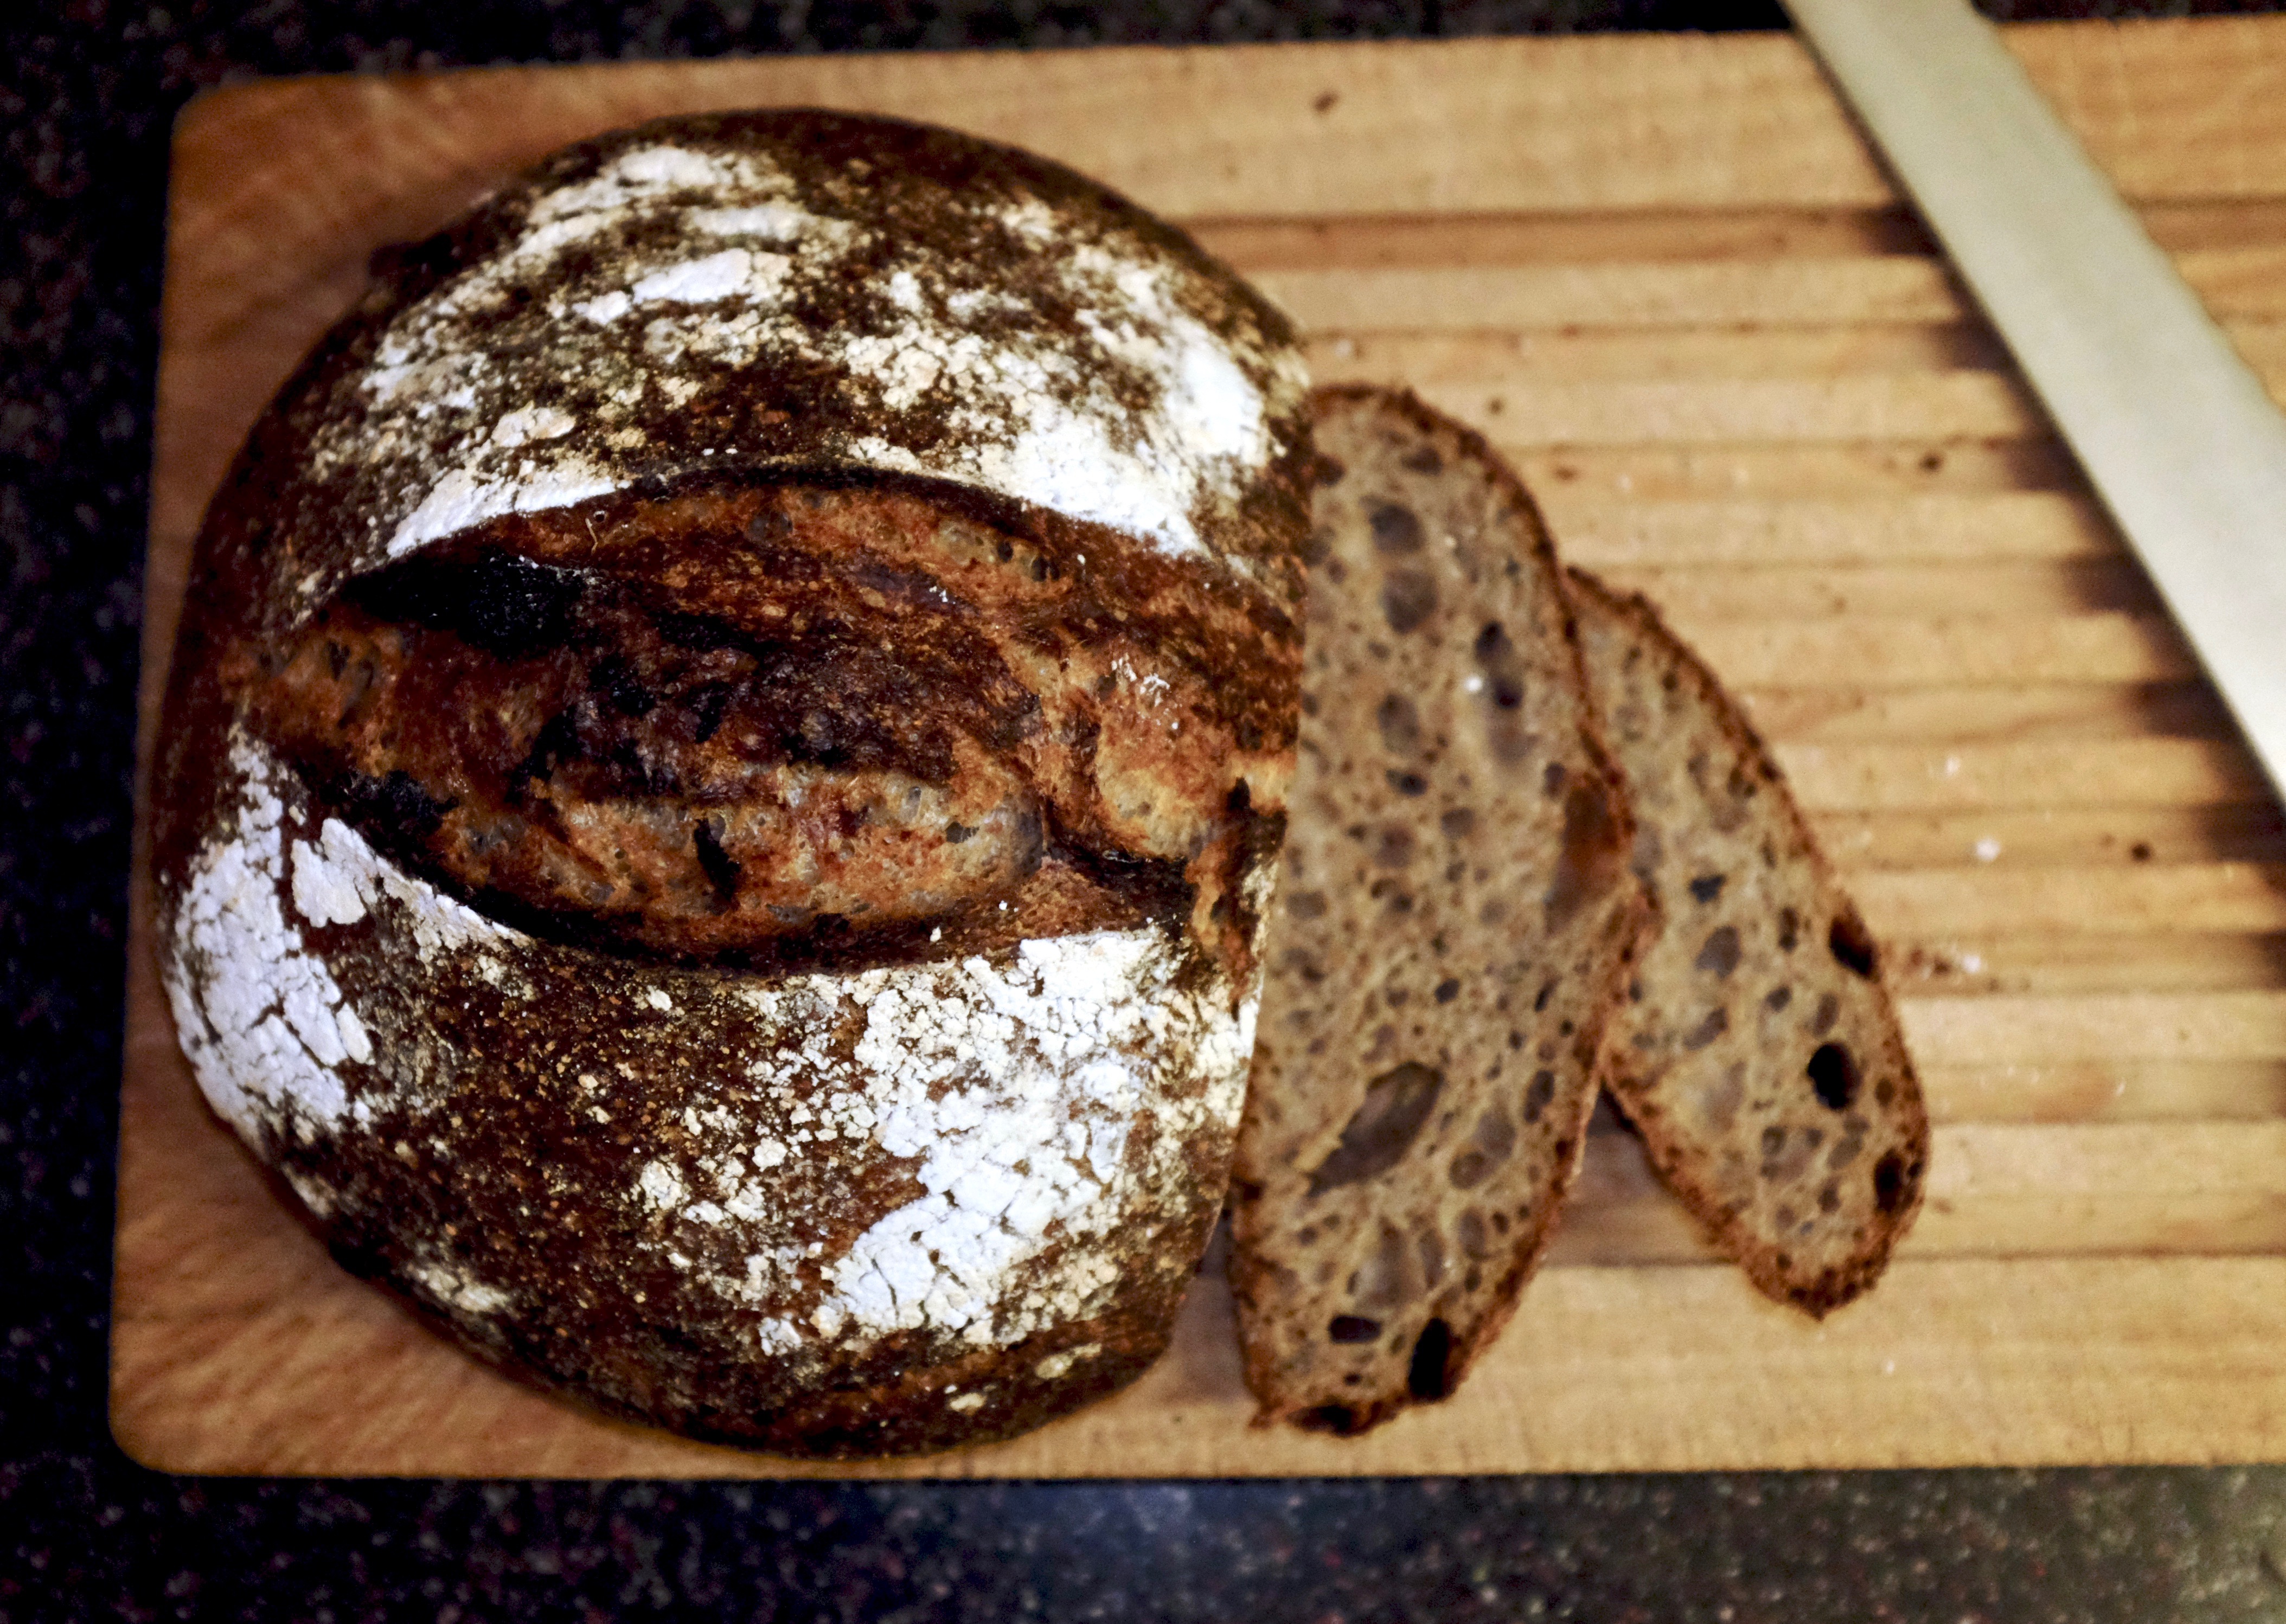 An image of a bread called “Return of the Sourdough”